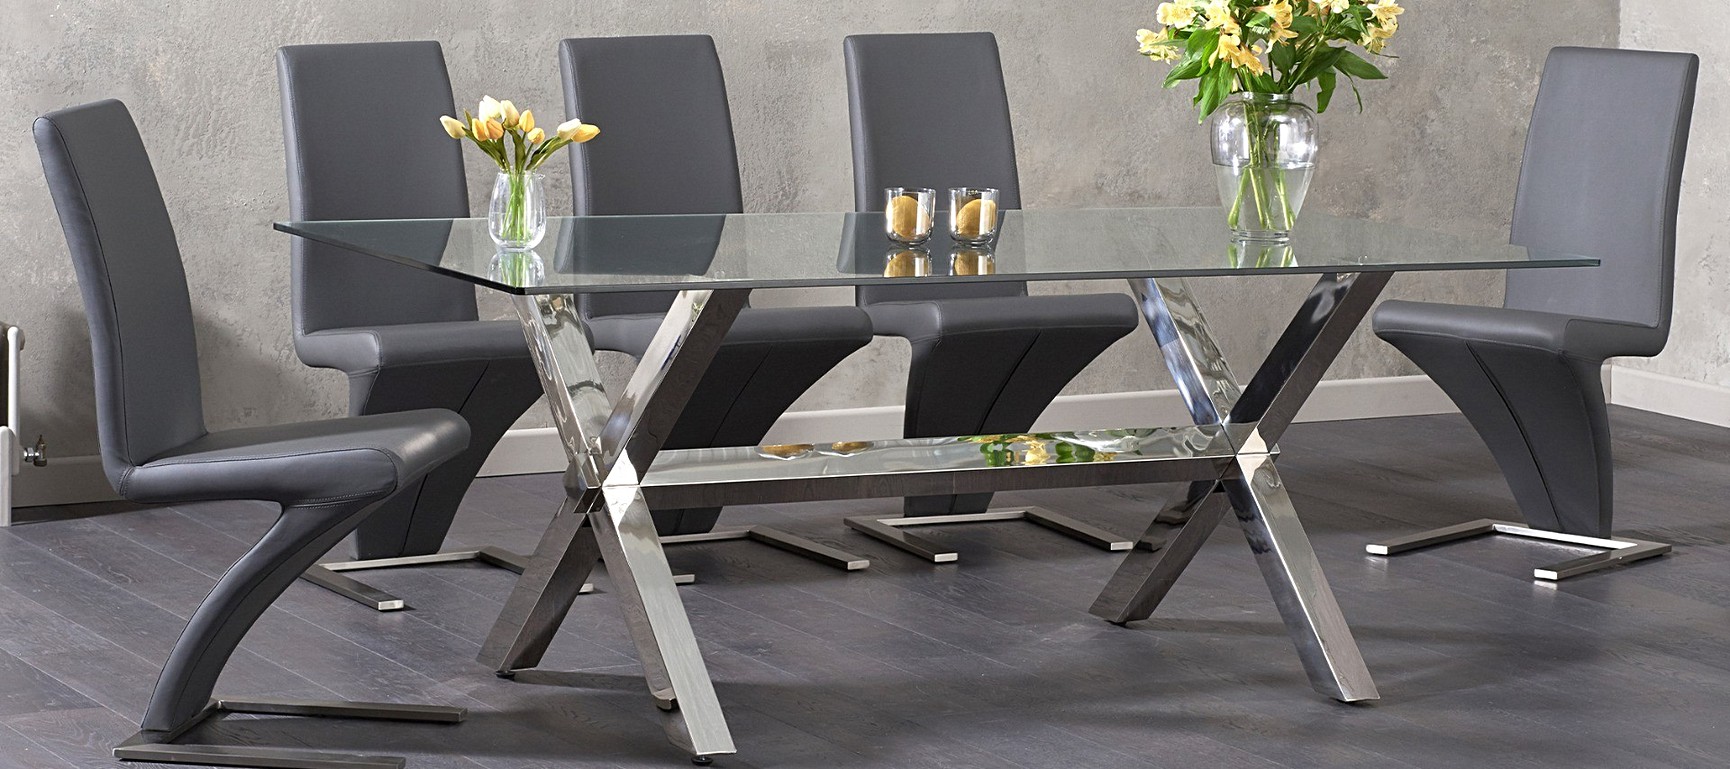 Renzo 200cm Glass Dining Table | Oak Furniture Superstore